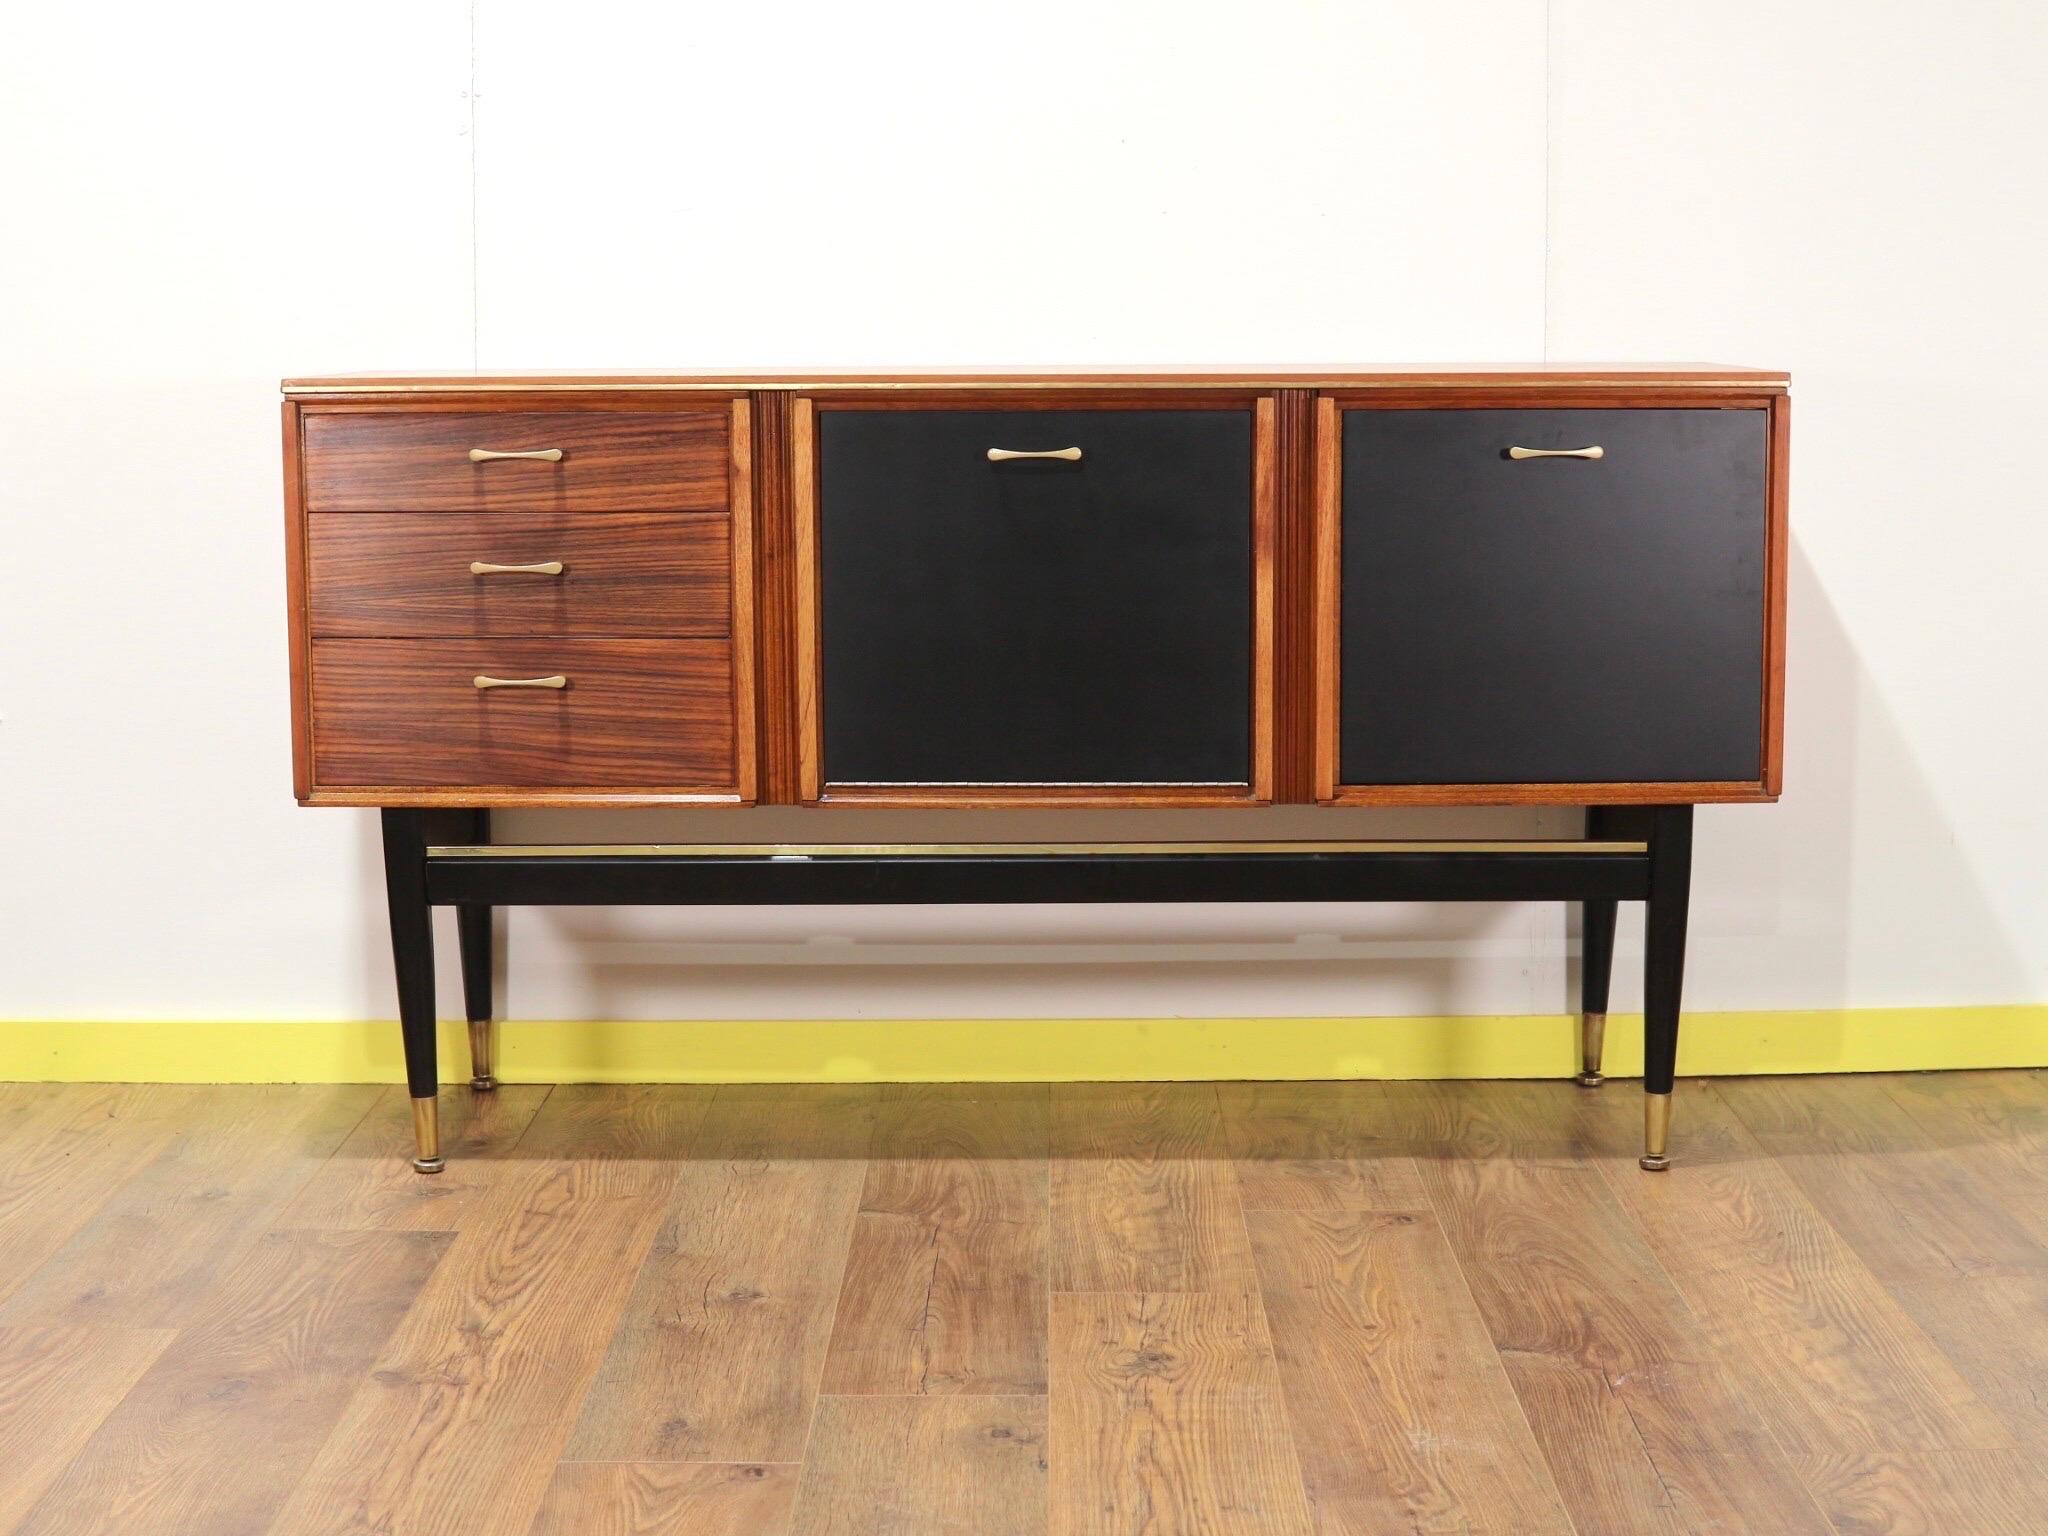 A beutifully designed credenza by british cabinet maker Stonehill Furniture.

Stood high on black tapered legs this cabinet would have been originally used as a cocktail cabinet but with plenty of storage could have plety of uses.

A real